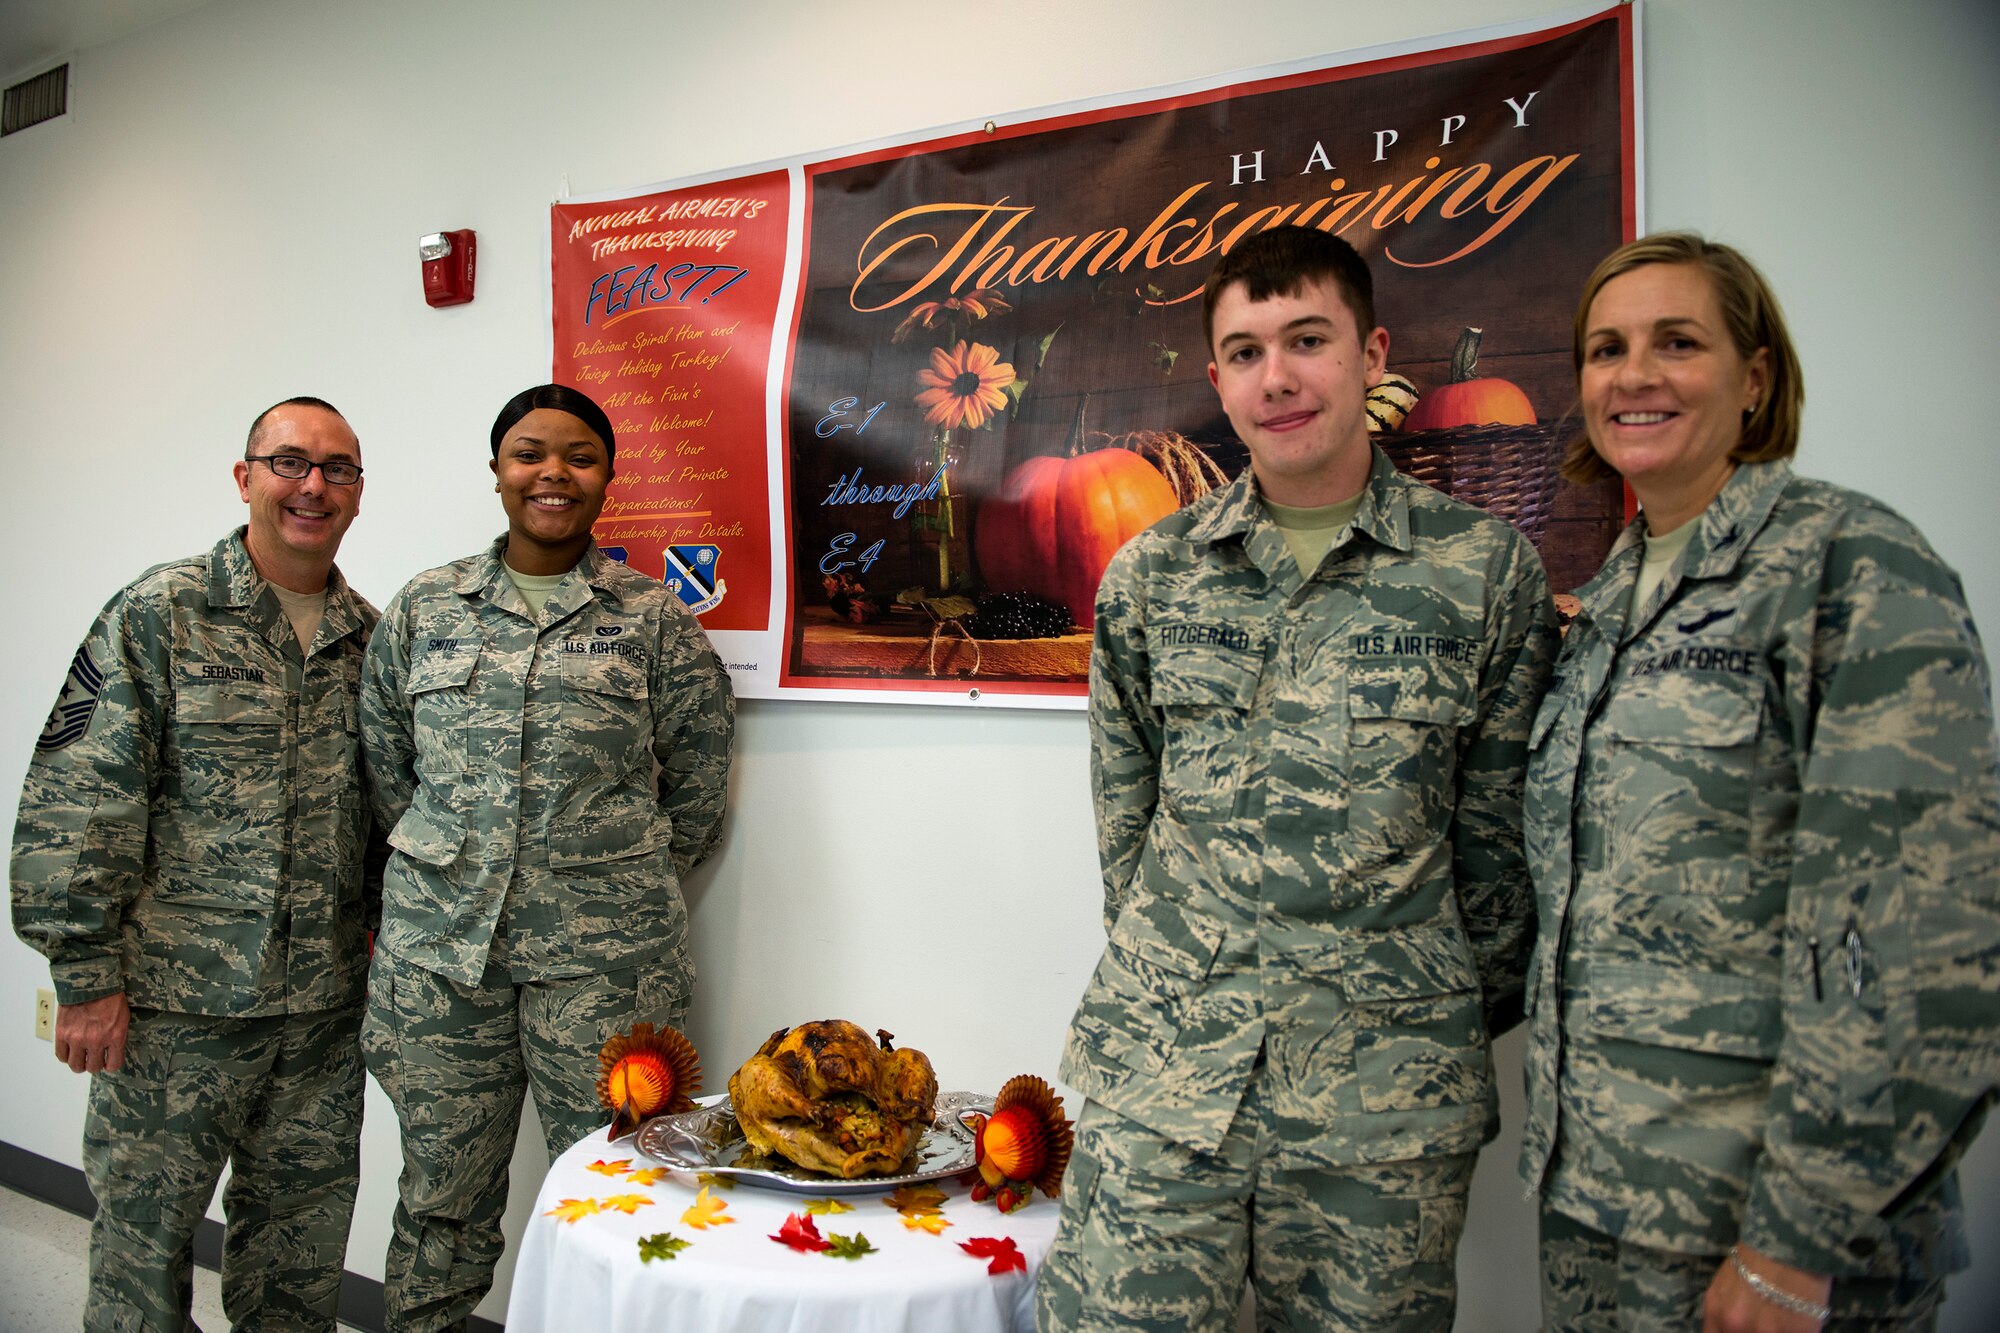 Members of Team Moody pose for a photo during the Annual Airmen’s Thanksgiving luncheon, Nov. 14, 2017, at Moody Air Force Base, Ga. Moody Chiefs Group, with the support of various base organizations, held the luncheon because many Airmen are unable to return home for Thanksgiving. (U.S. Air Force photo by Airman 1st Class Erick Requadt)